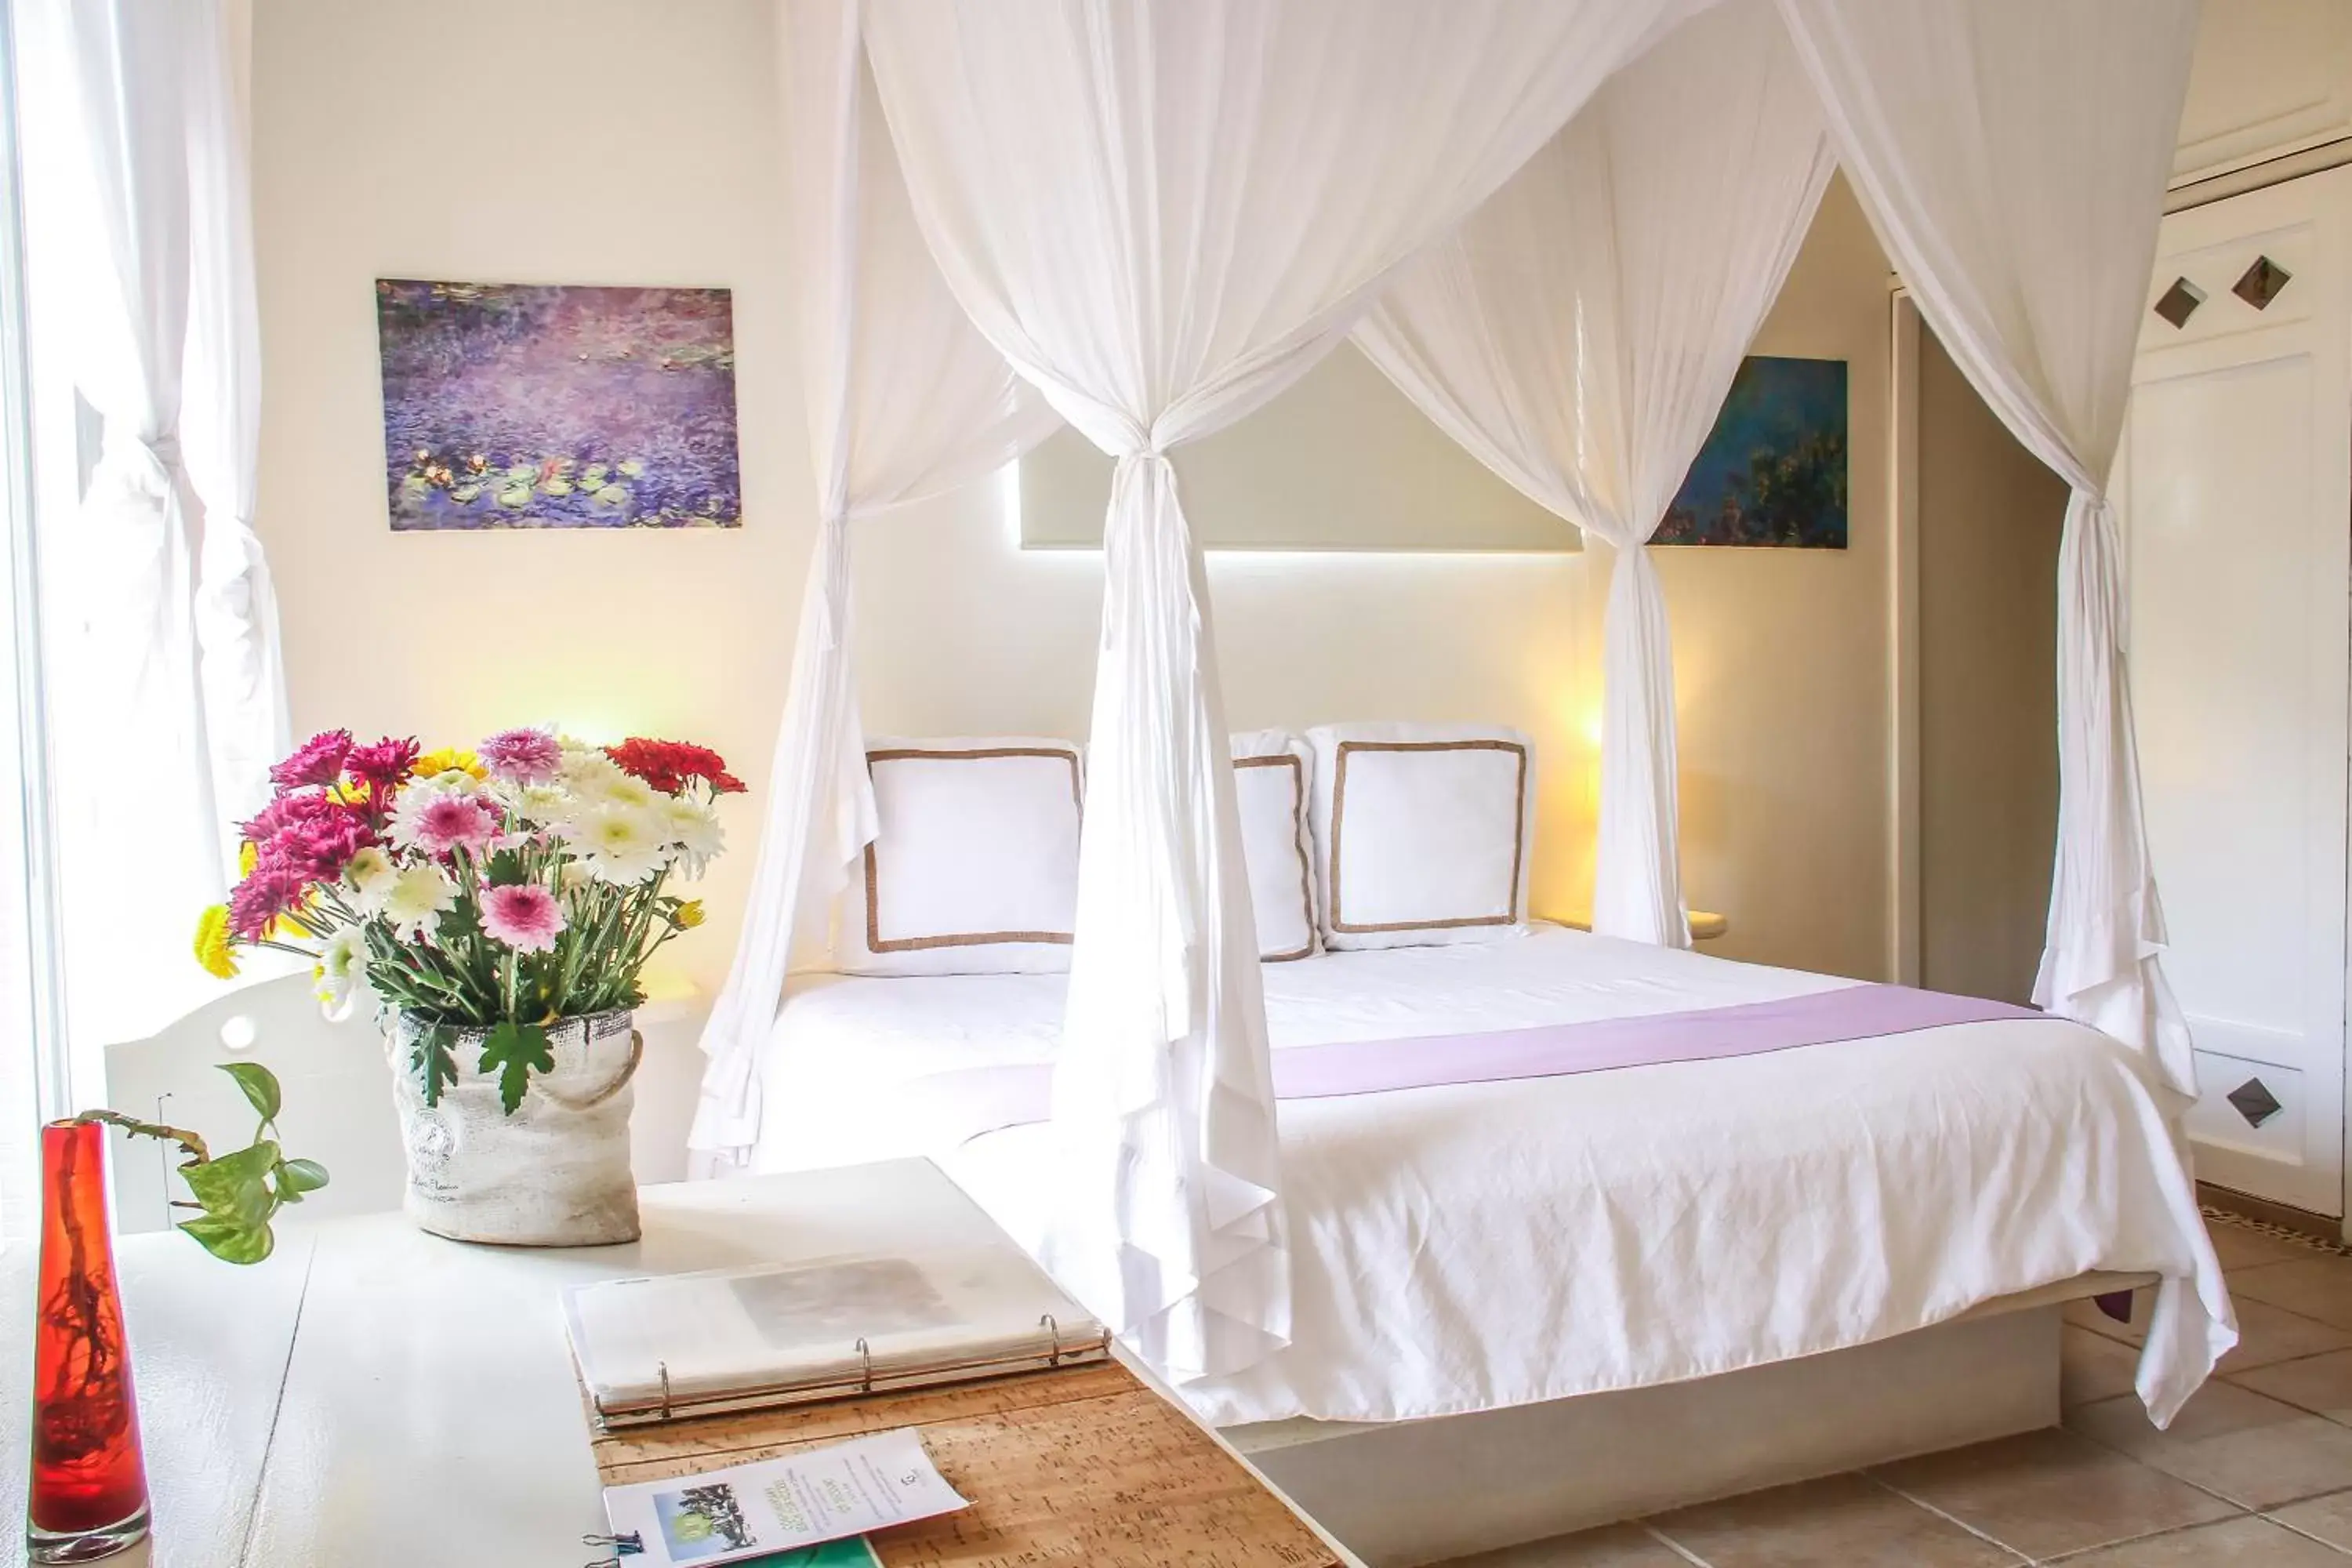 Monet - King Suite with Balcony in Villas Geminis Boutique Condohotel